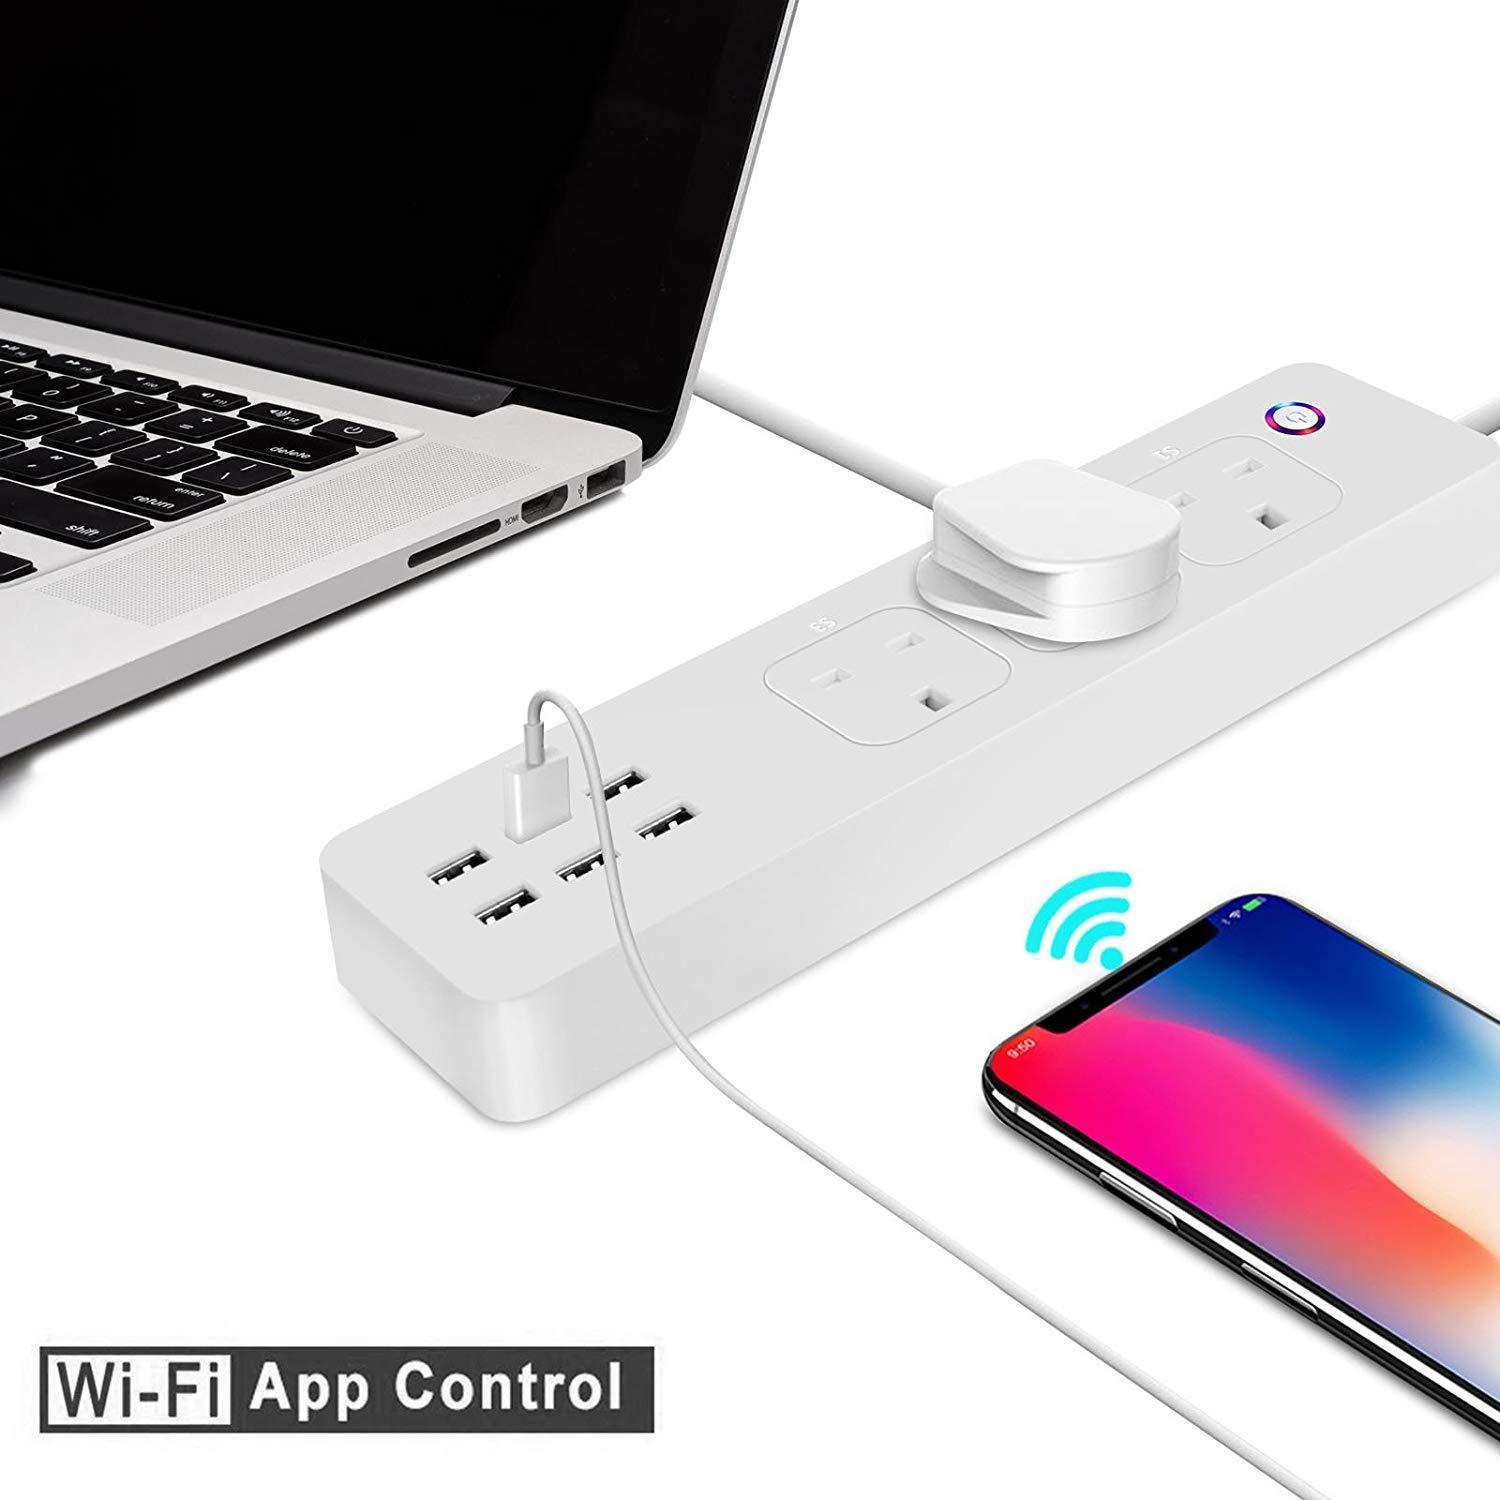 Smart WiFi Power Strip APP Remote Voice Individual Control with Amazon Alexa Google Home Assistant 3 AC 6 USB Extension Lead Cord Timer via Android iOS Smartphone Tablets Works with WiFi 2.4GHz